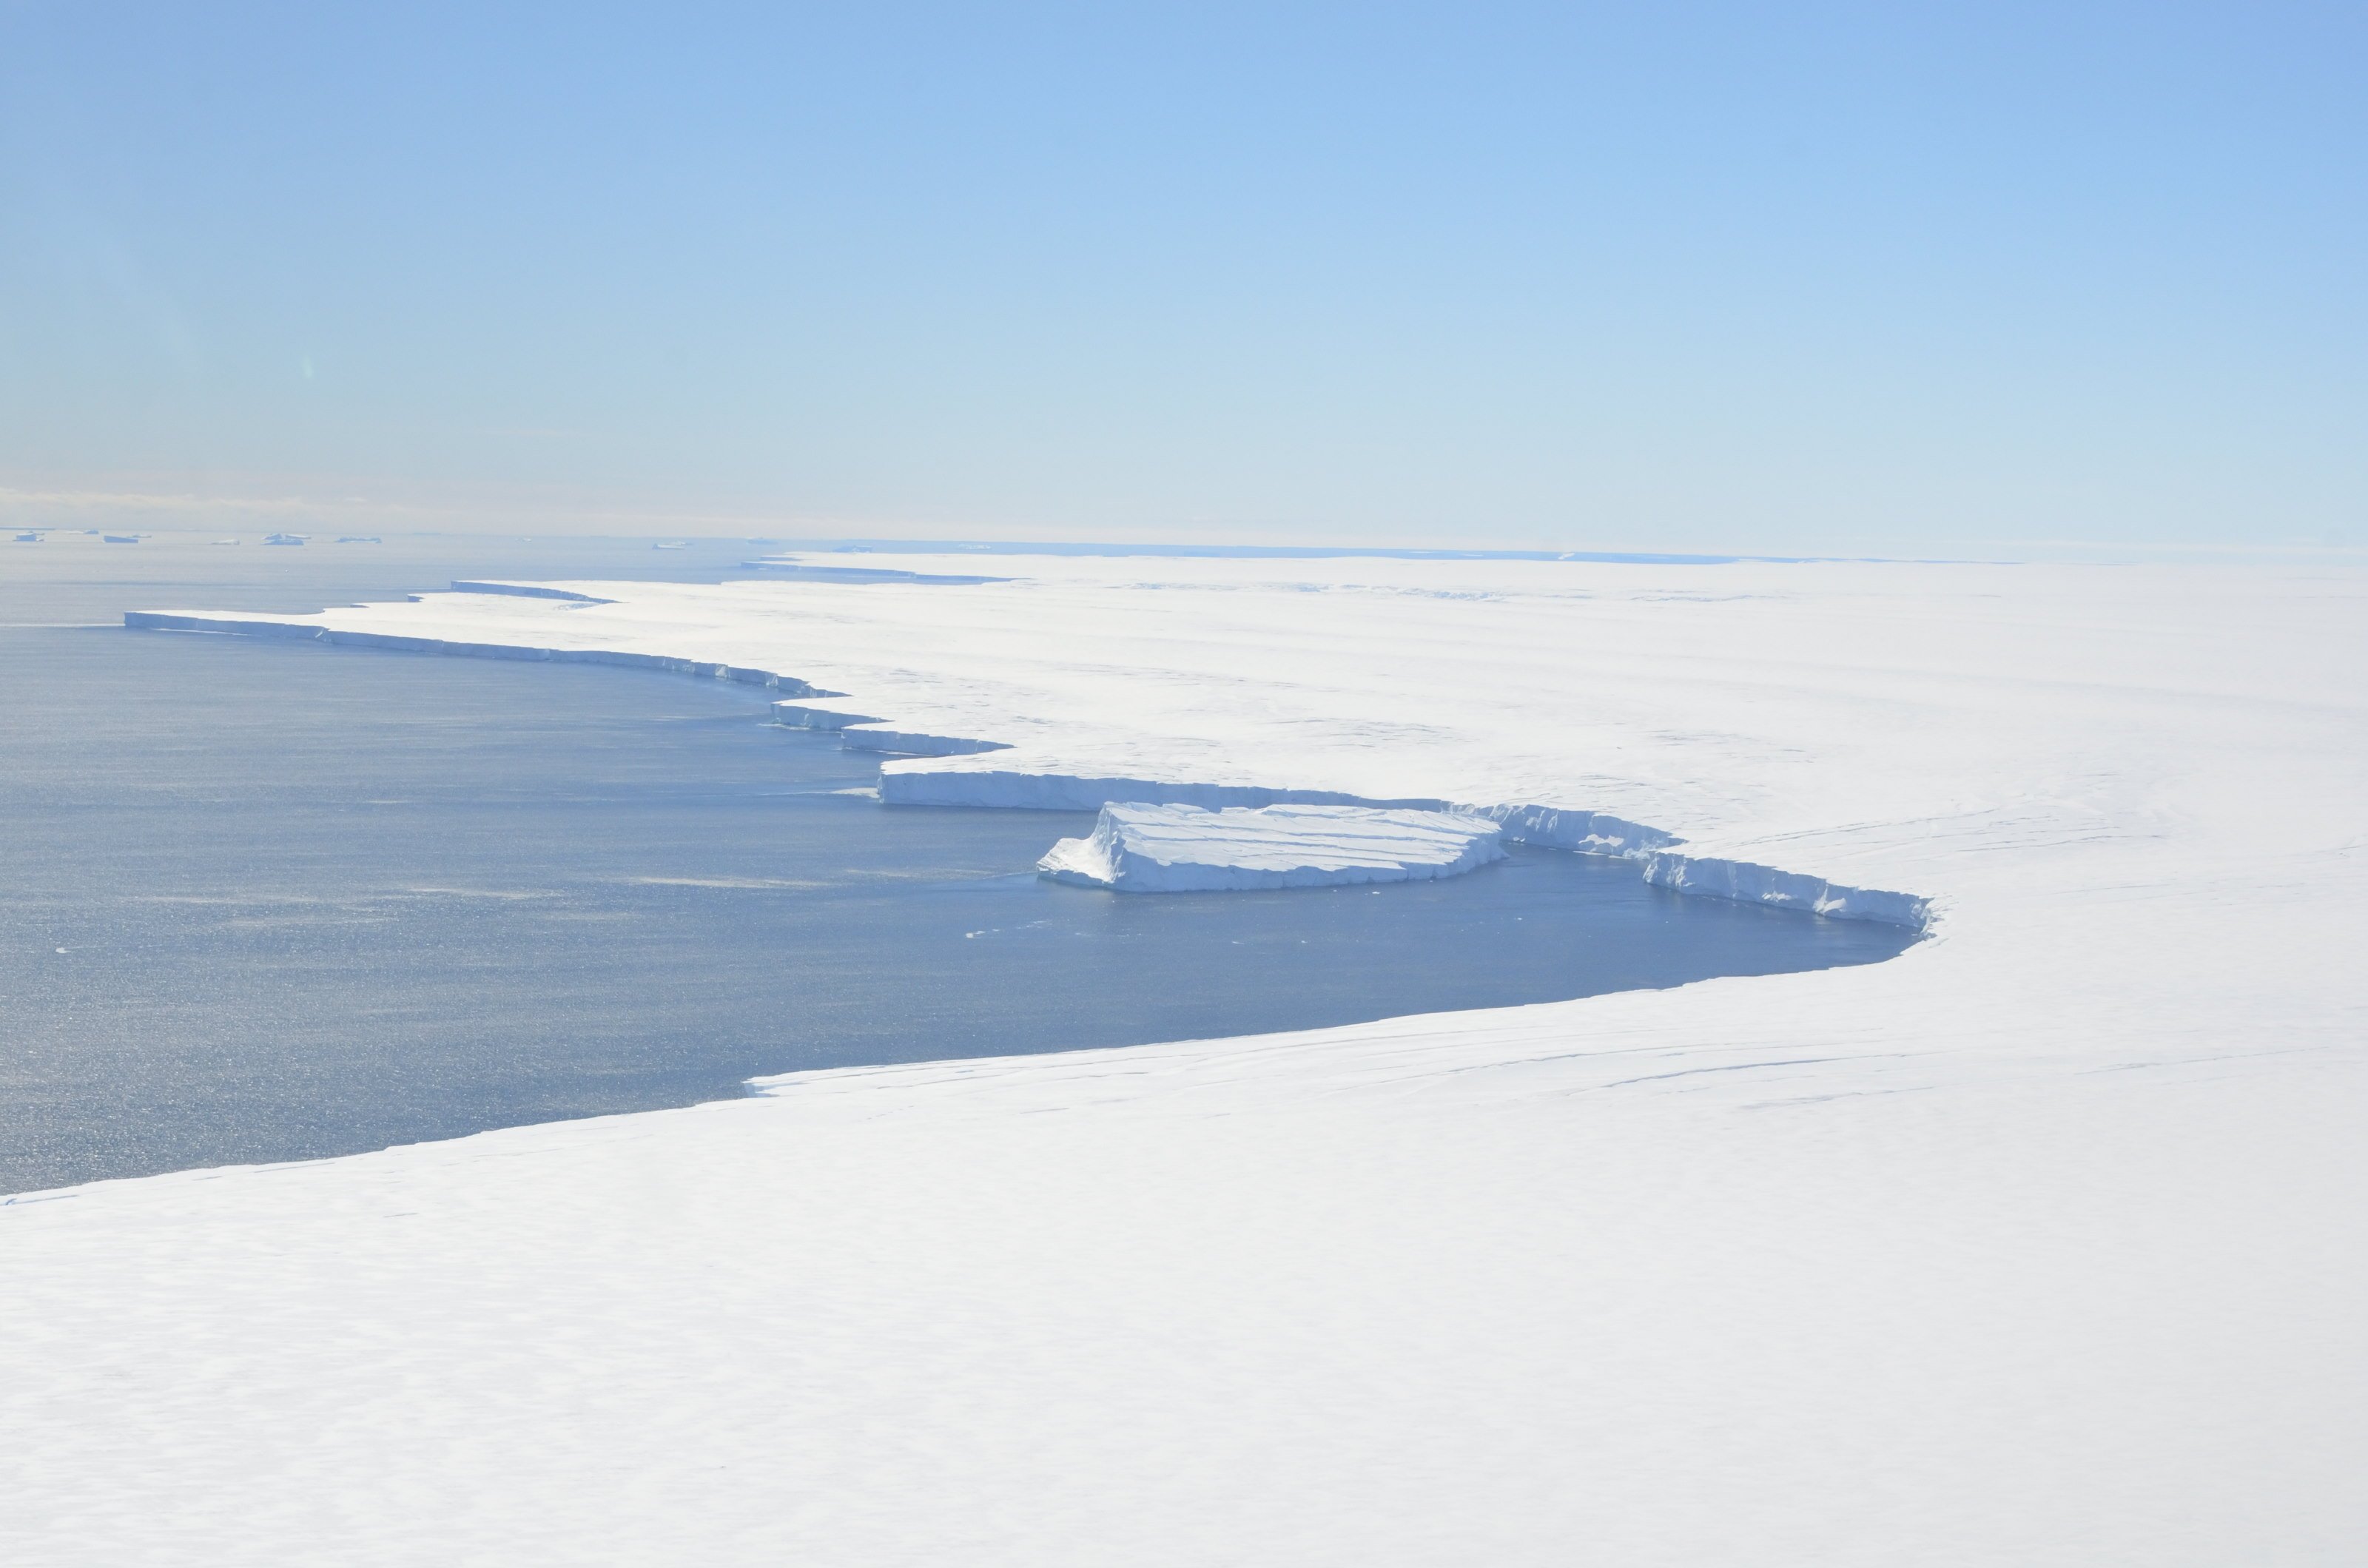 Privat photo. From helicopter over West Ice Shelf, East Antarctica